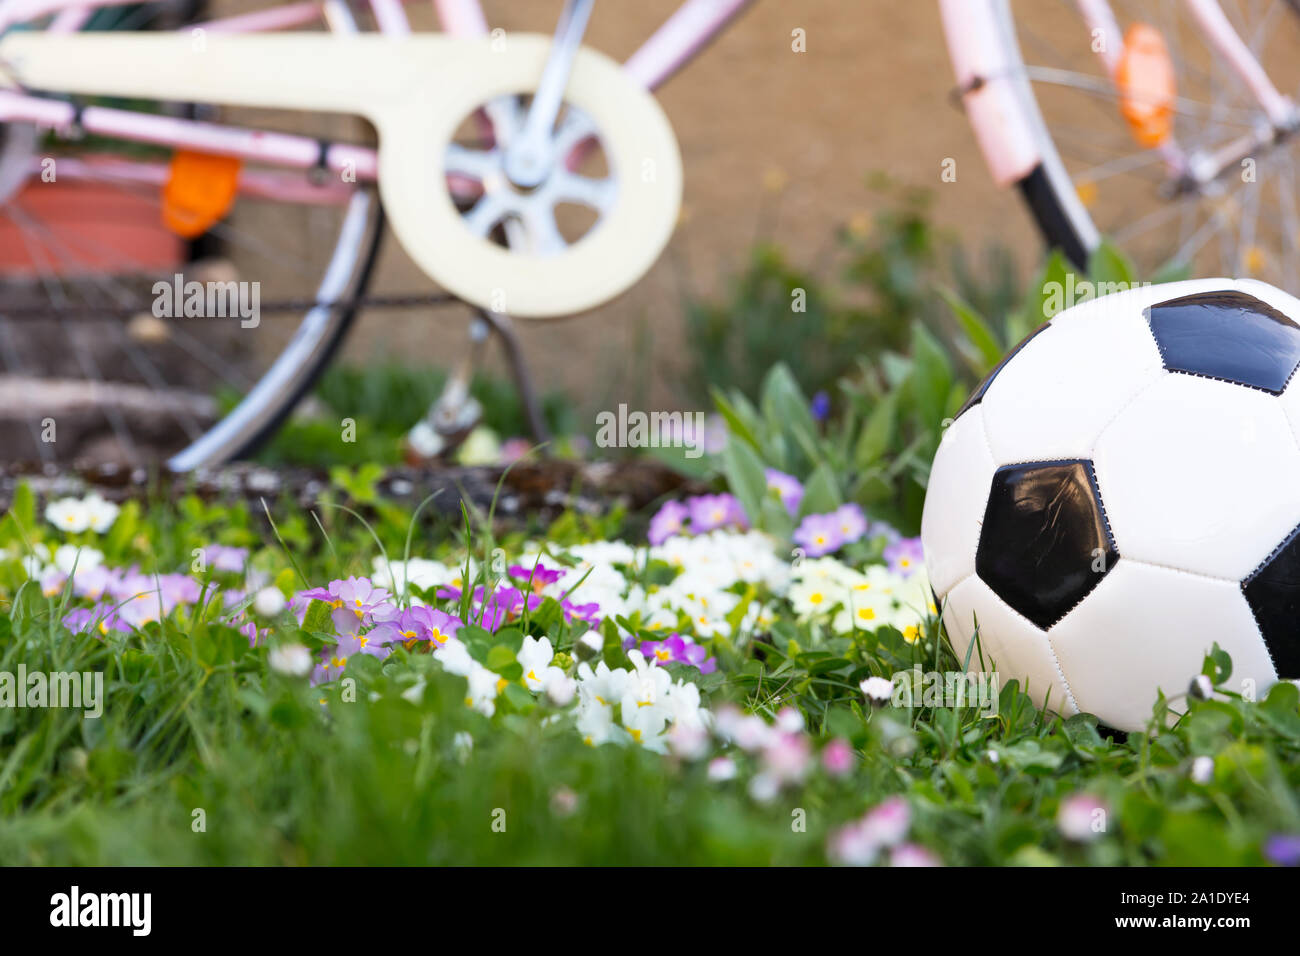 a soccerball and a bicycle on a green meadow Stock Photo